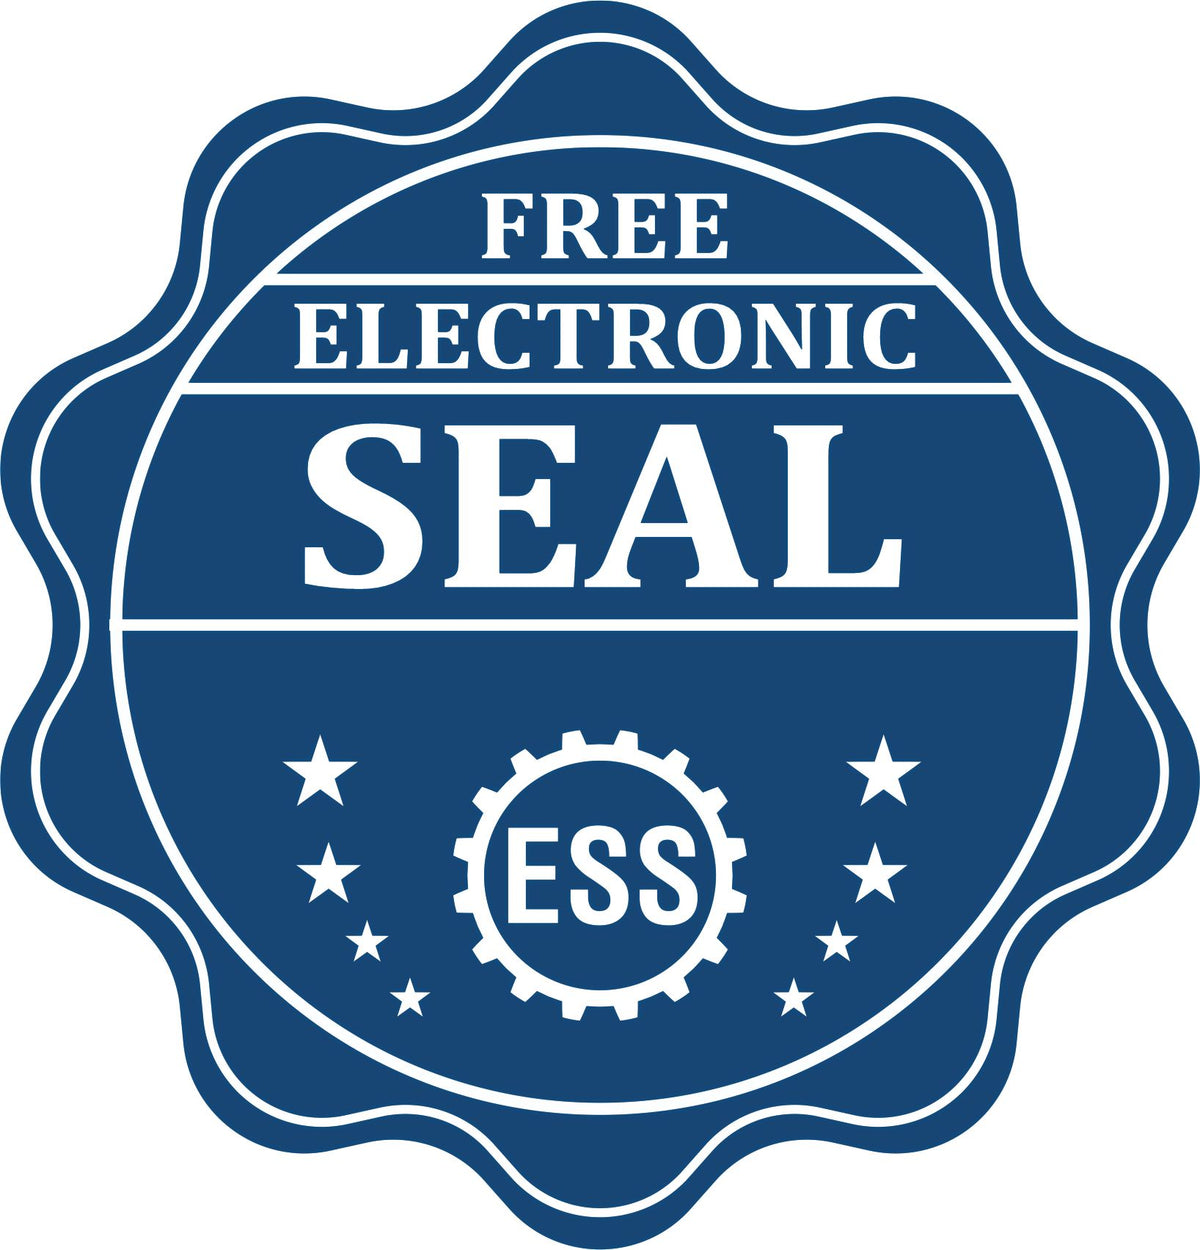 A badge showing a free electronic seal for the Gift Arkansas Geologist Seal with stars and the ESS gear on the emblem.